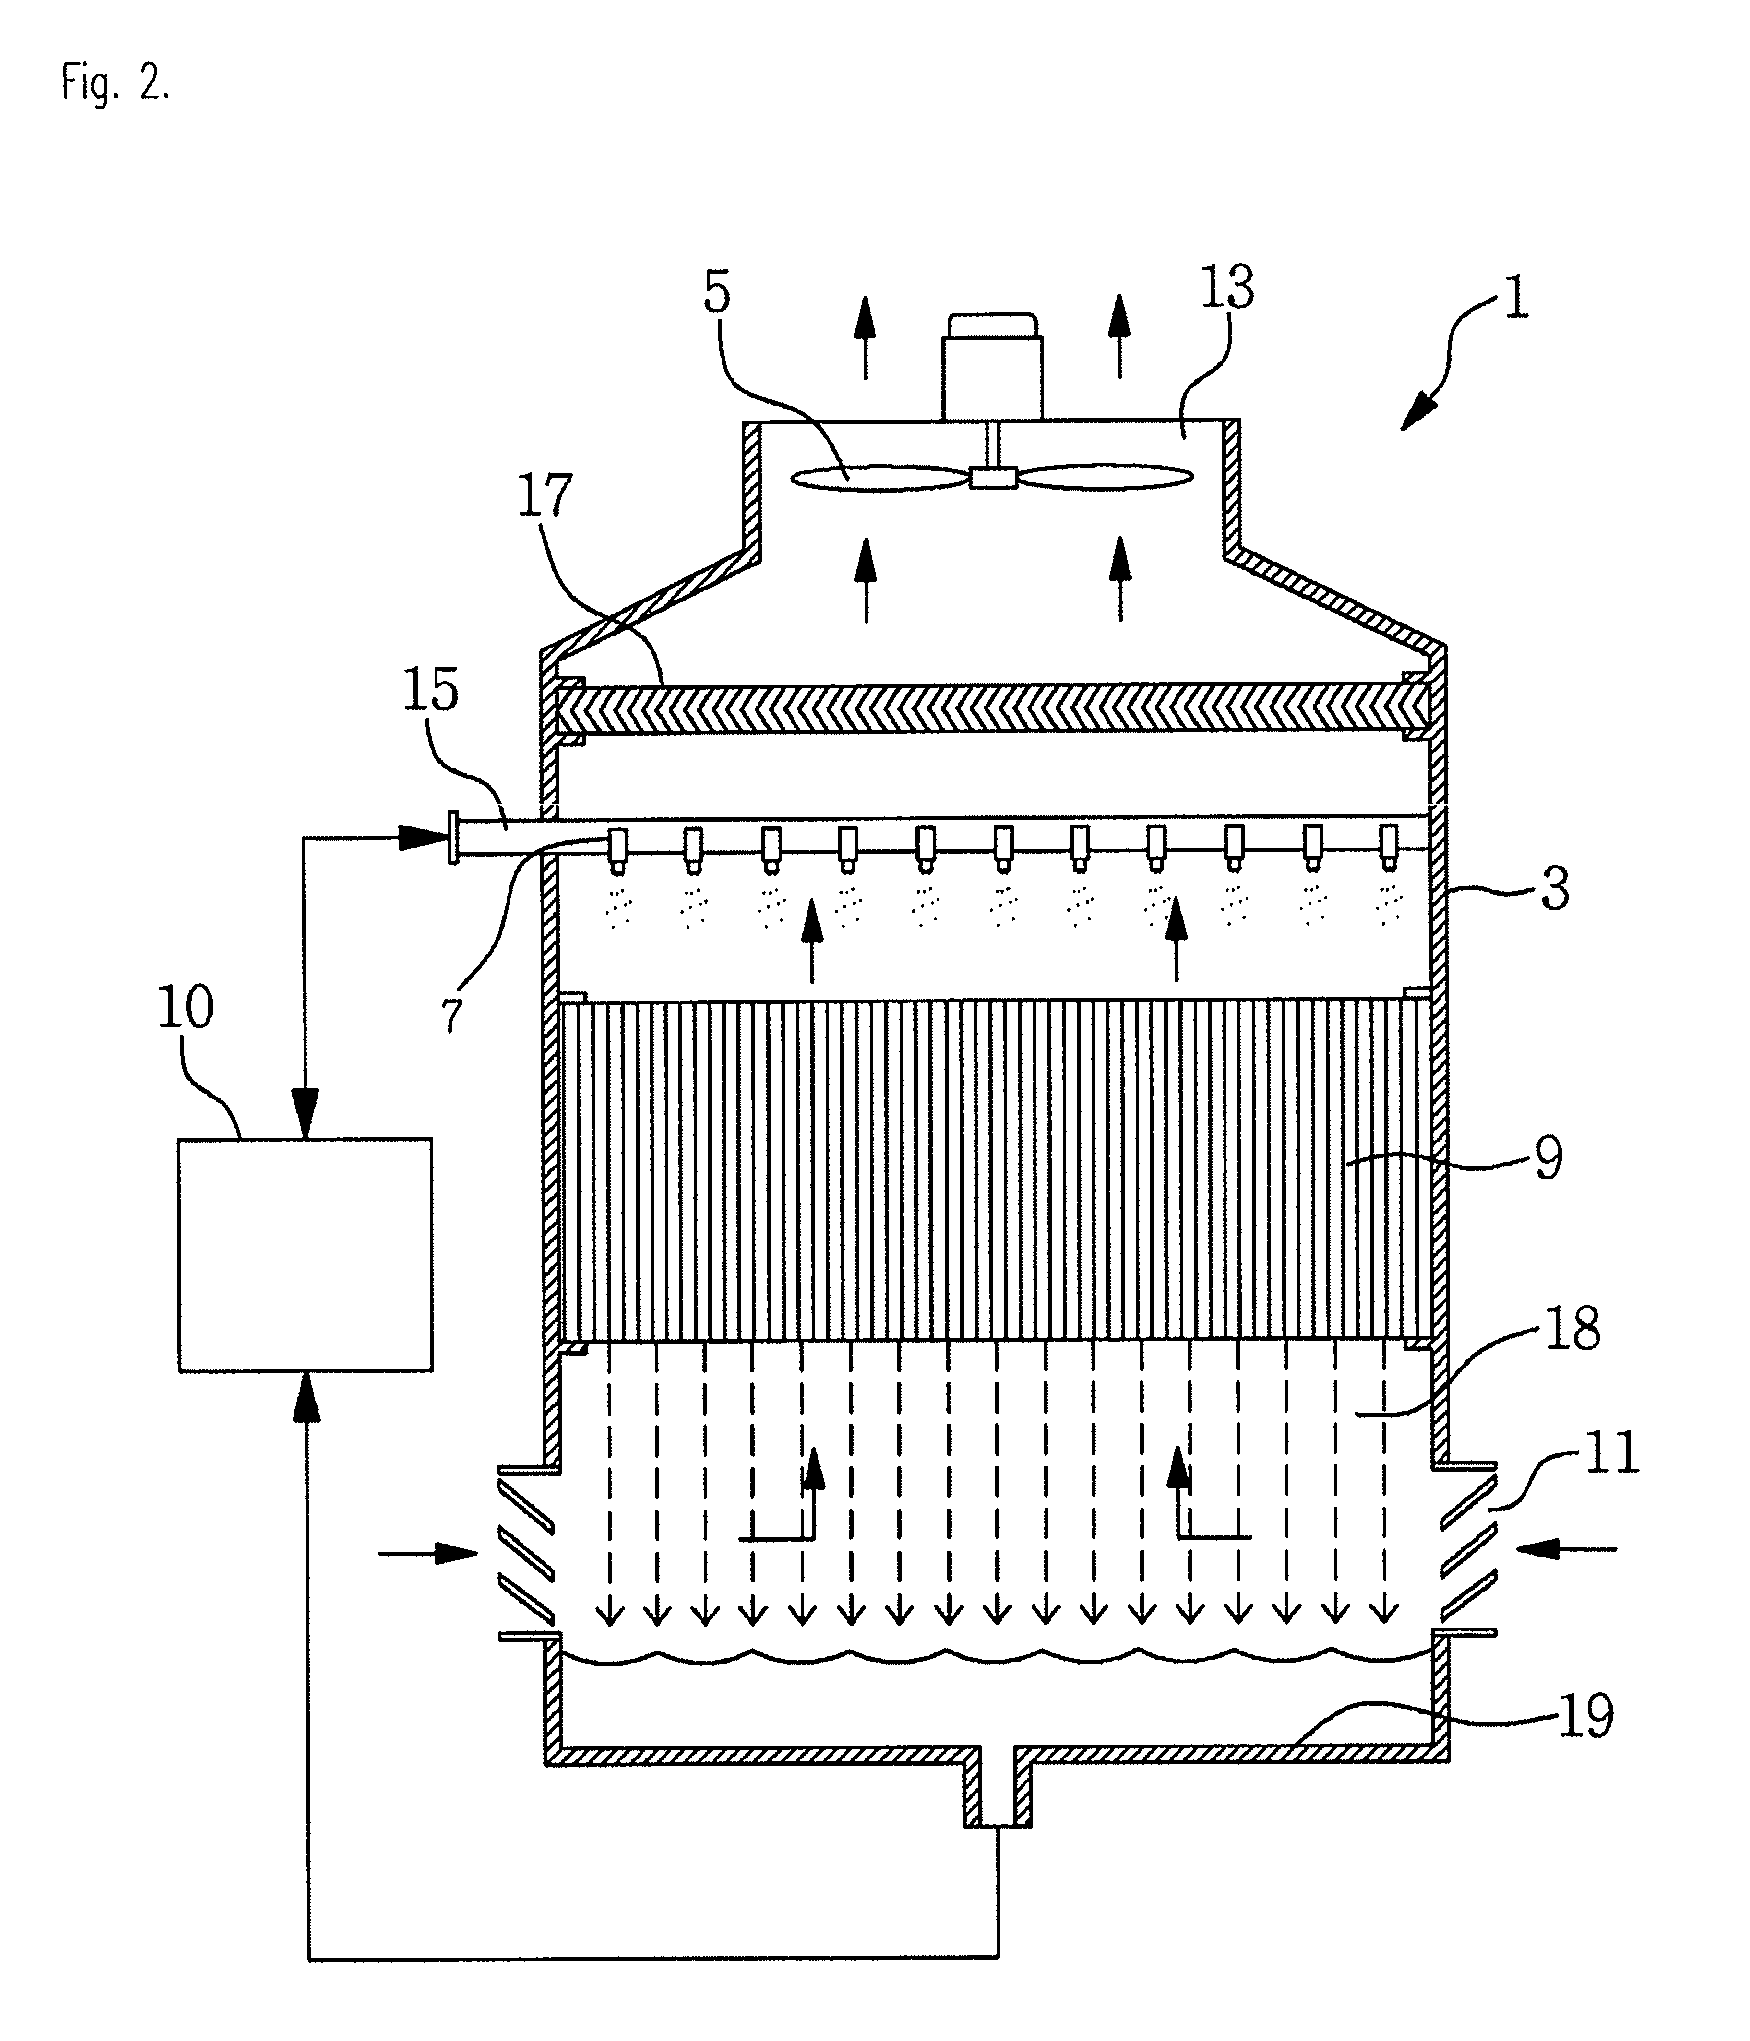 Counter flow type of cooling tower